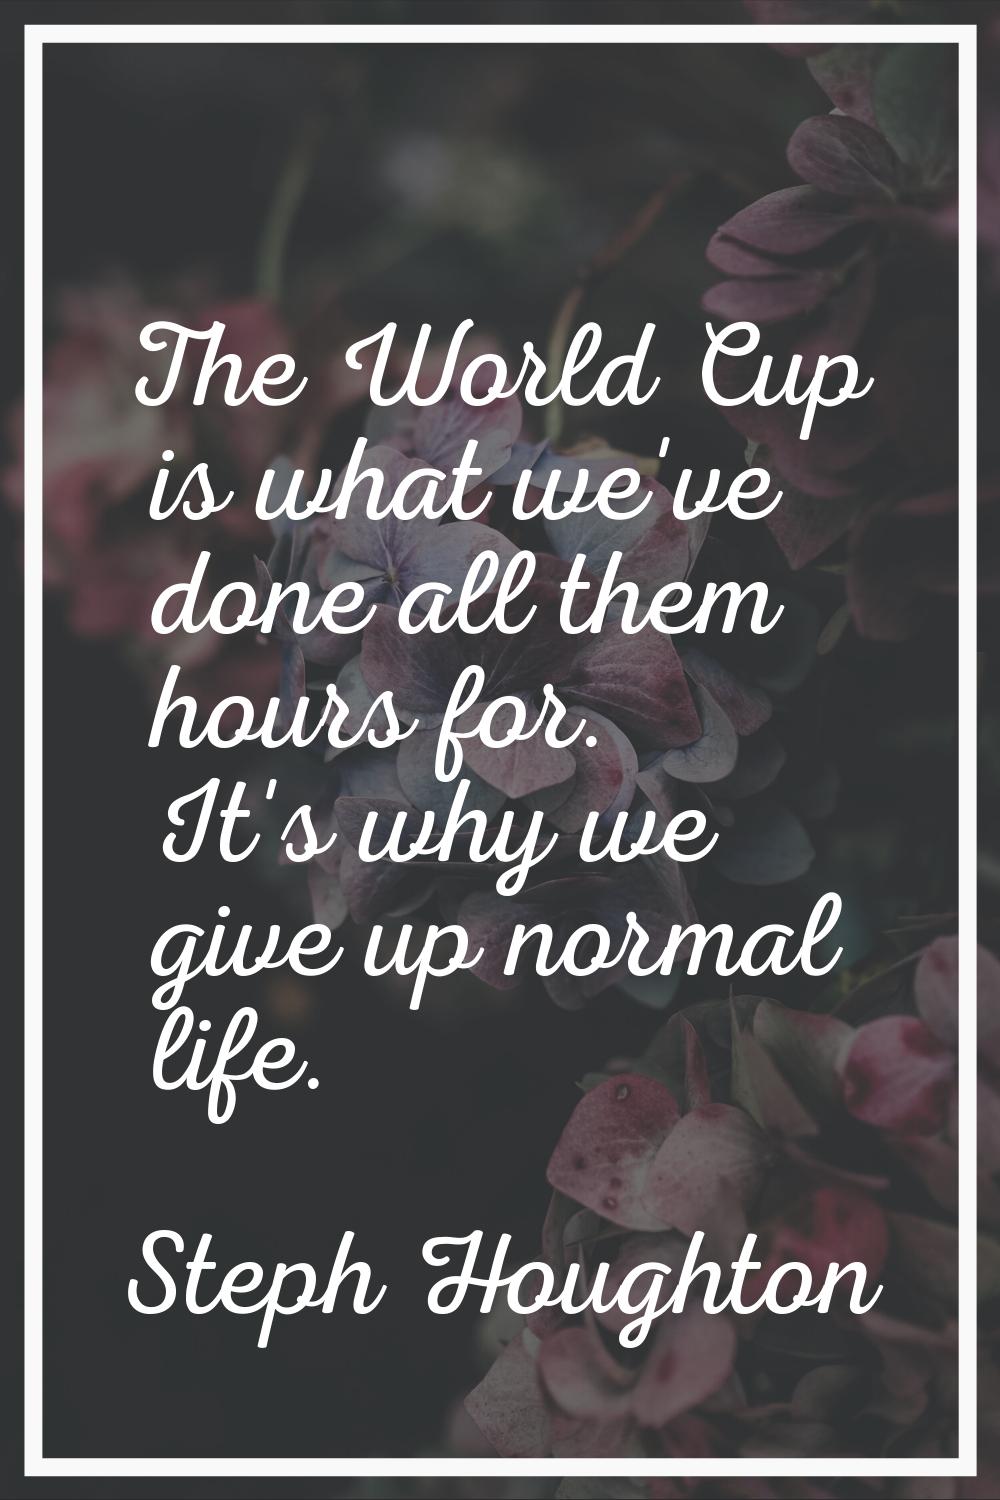 The World Cup is what we've done all them hours for. It's why we give up normal life.